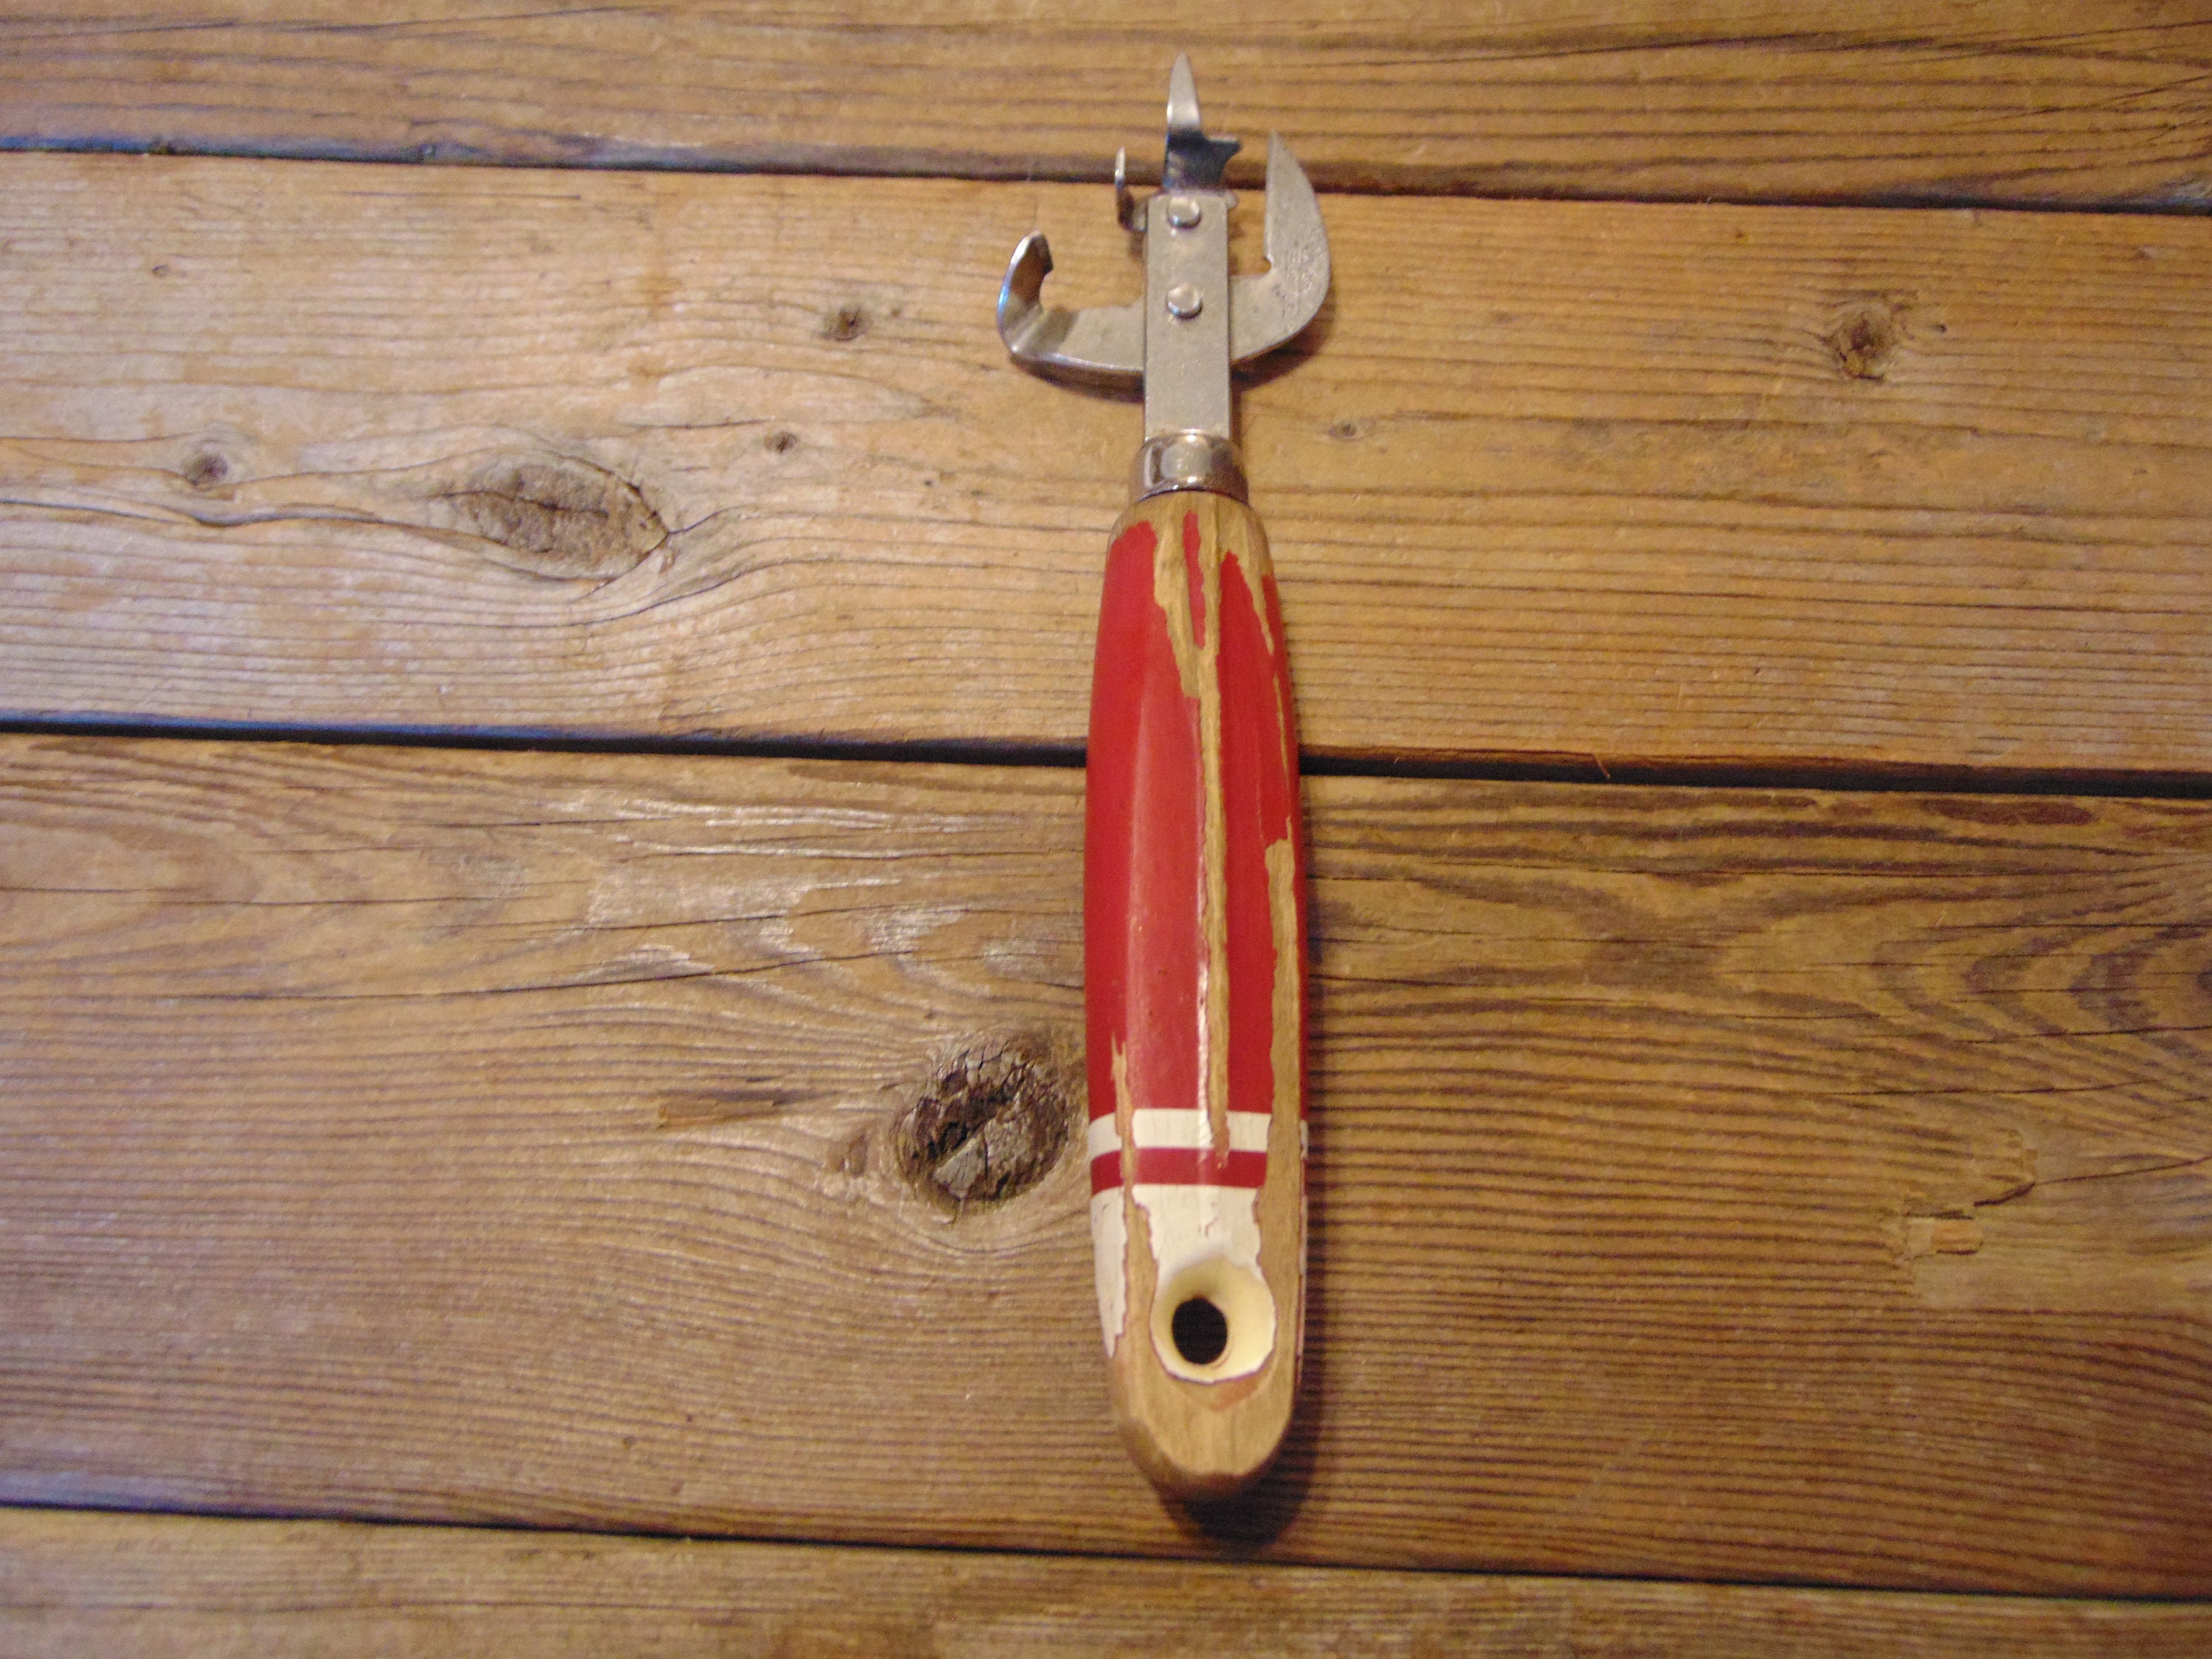 Classic EKCO Vintage Red and White Handled Manual Can Opener